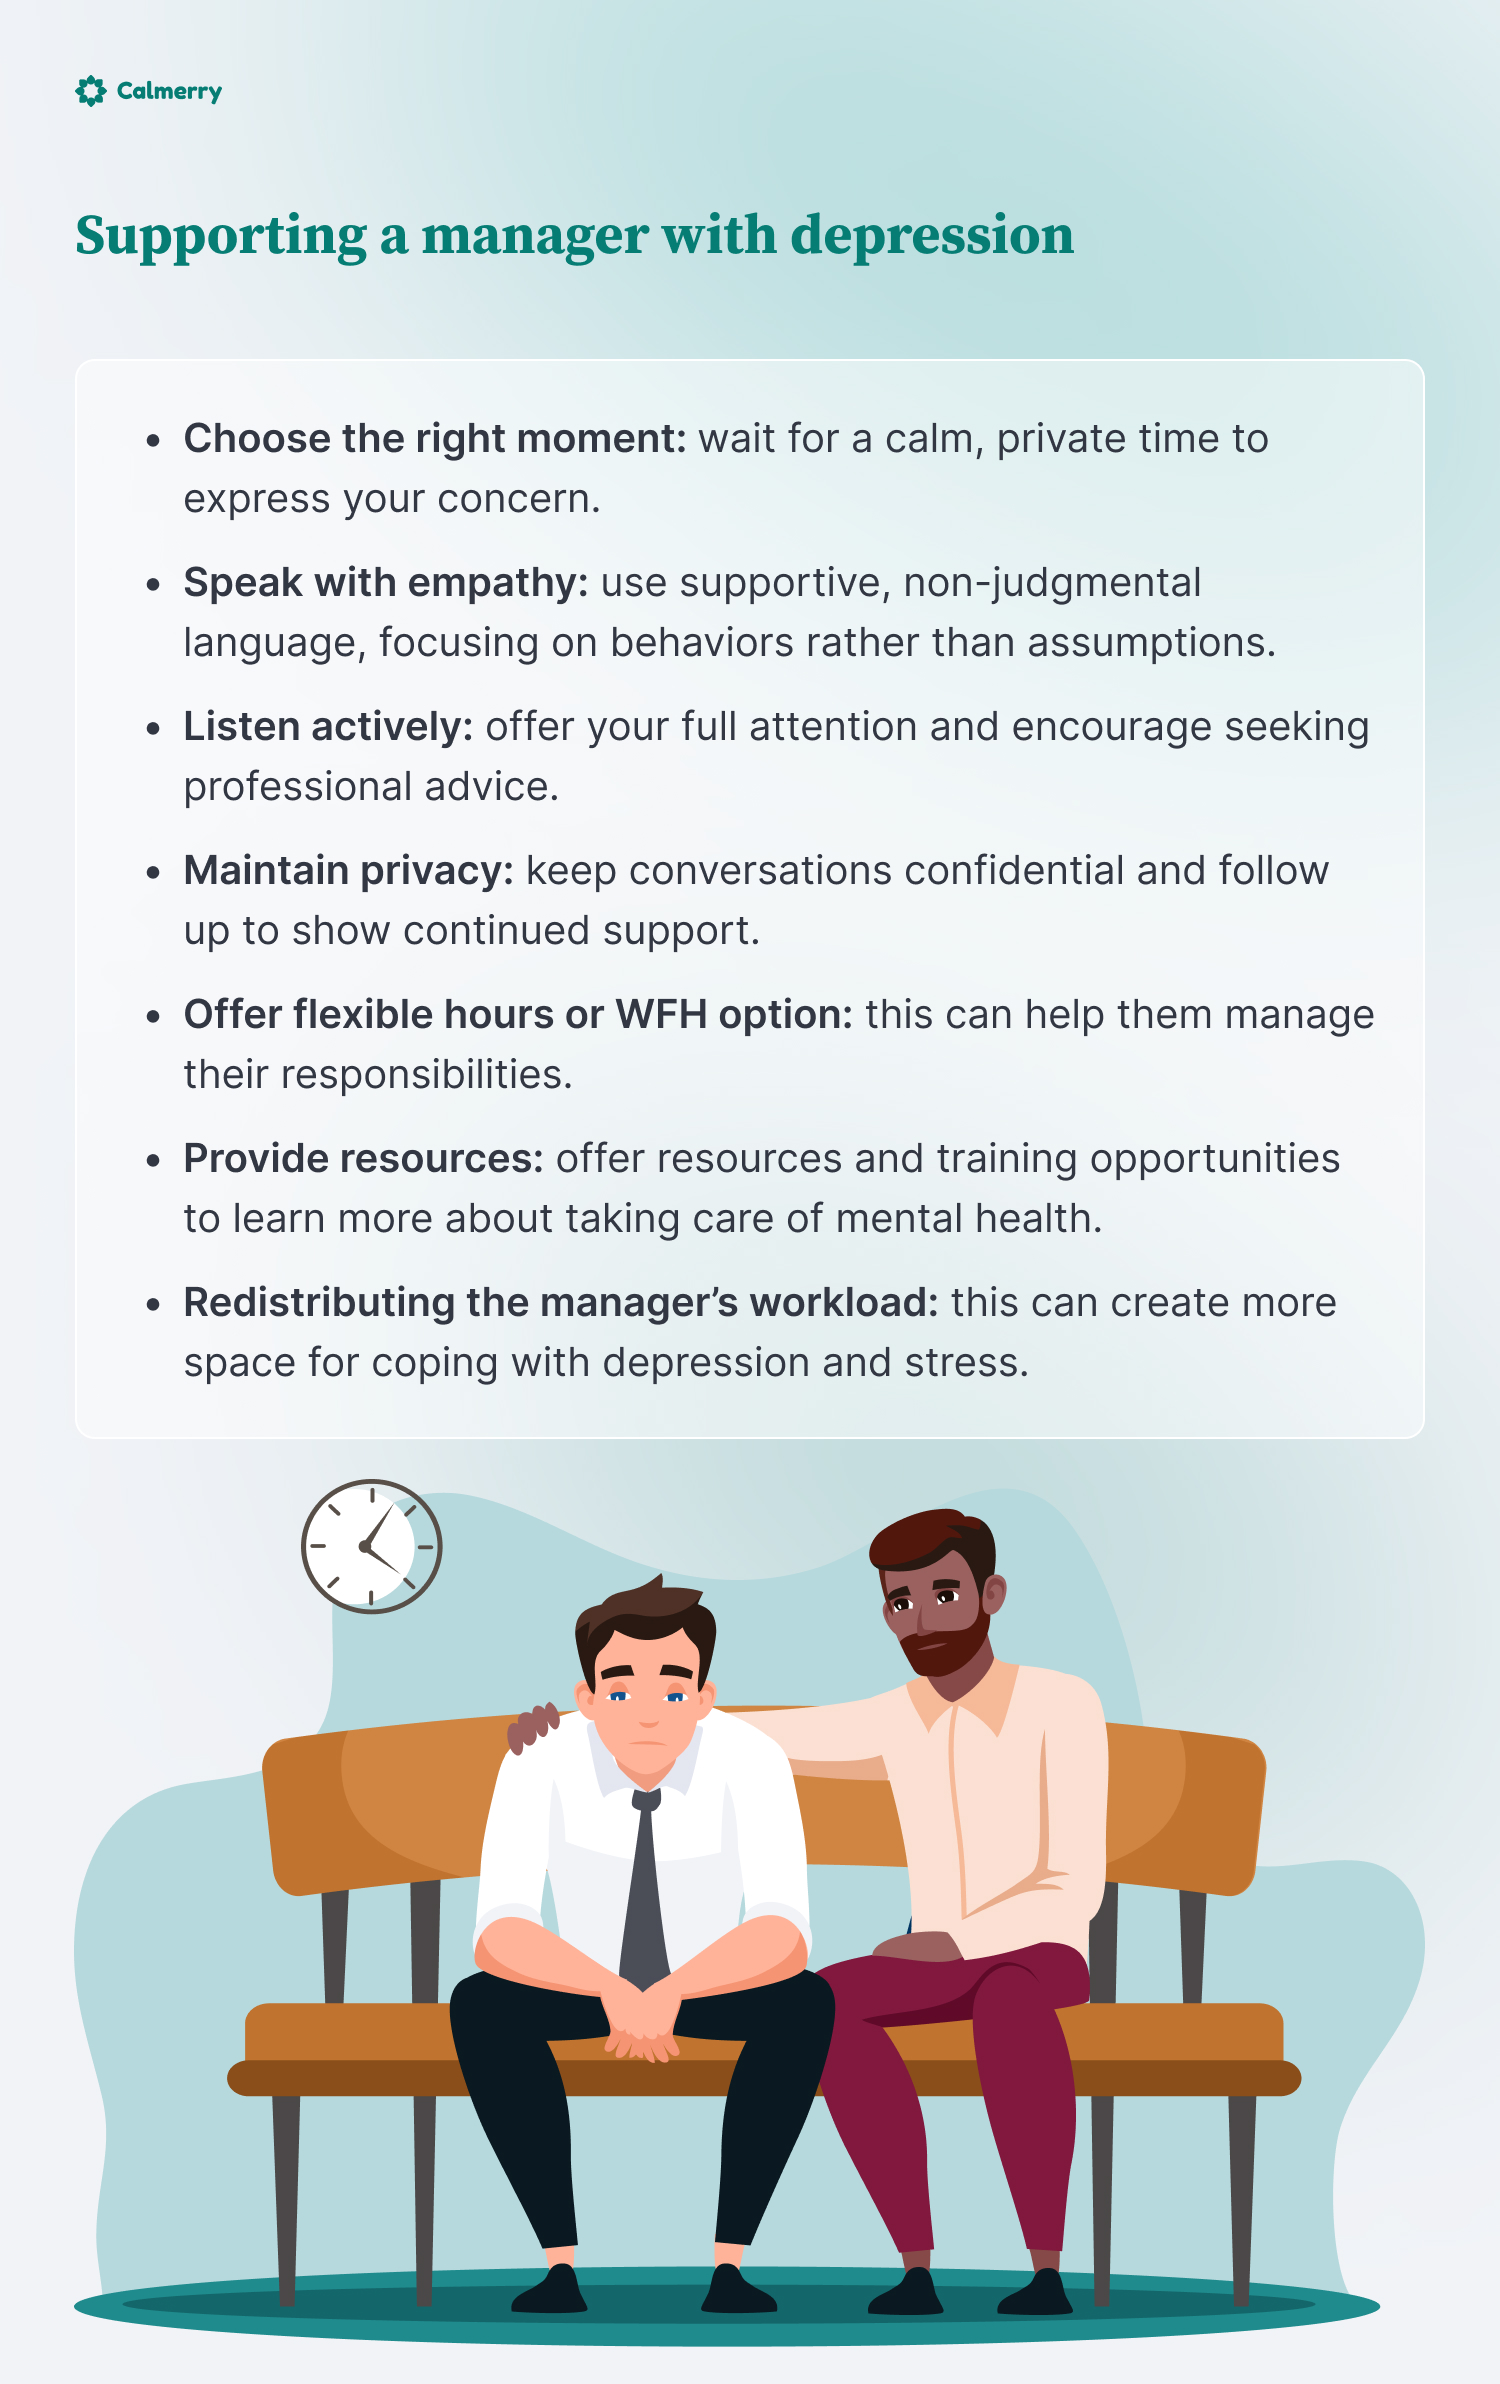 Supporting a manager with depression
Choose the right moment: wait for a calm, private time to express your concern.
Speak with empathy: use supportive, non-judgmental language, focusing on behaviors rather than assumptions.
Listen actively: offer your full attention and encourage seeking professional advice.
Maintain privacy: keep conversations confidential and follow up to show continued support.
Offer flexible hours or WFH option: this can help them manage their responsibilities.
Provide resources: offer resources and training opportunities to learn more about taking care of mental health.
Redistributing the manager’s workload: this can create more space for coping with depression and stress.